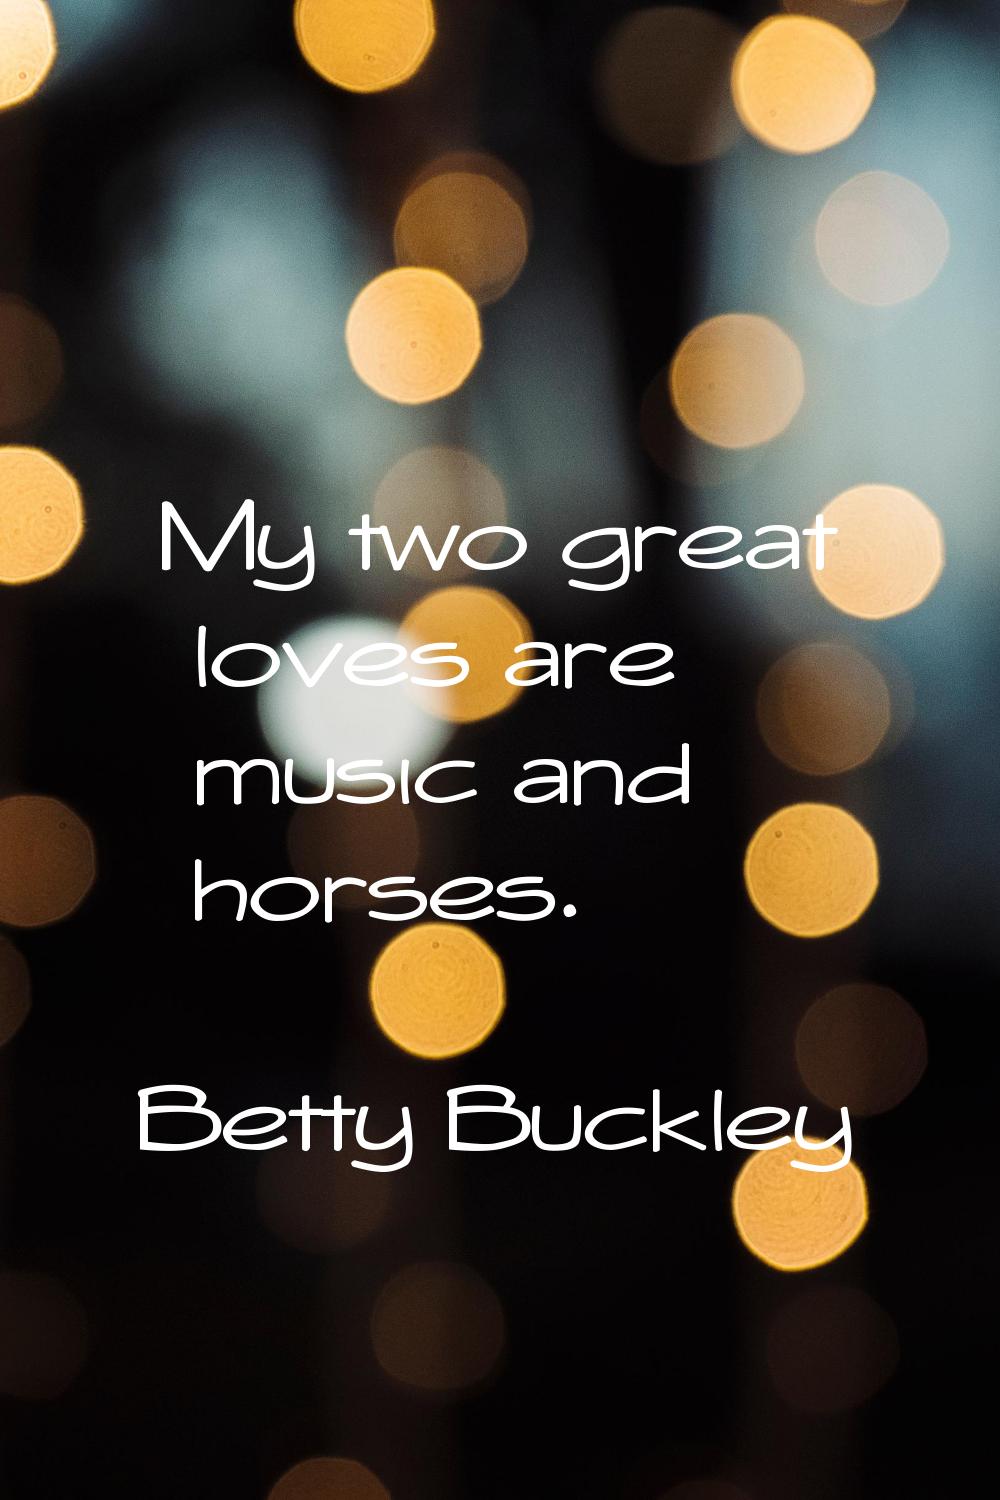 My two great loves are music and horses.